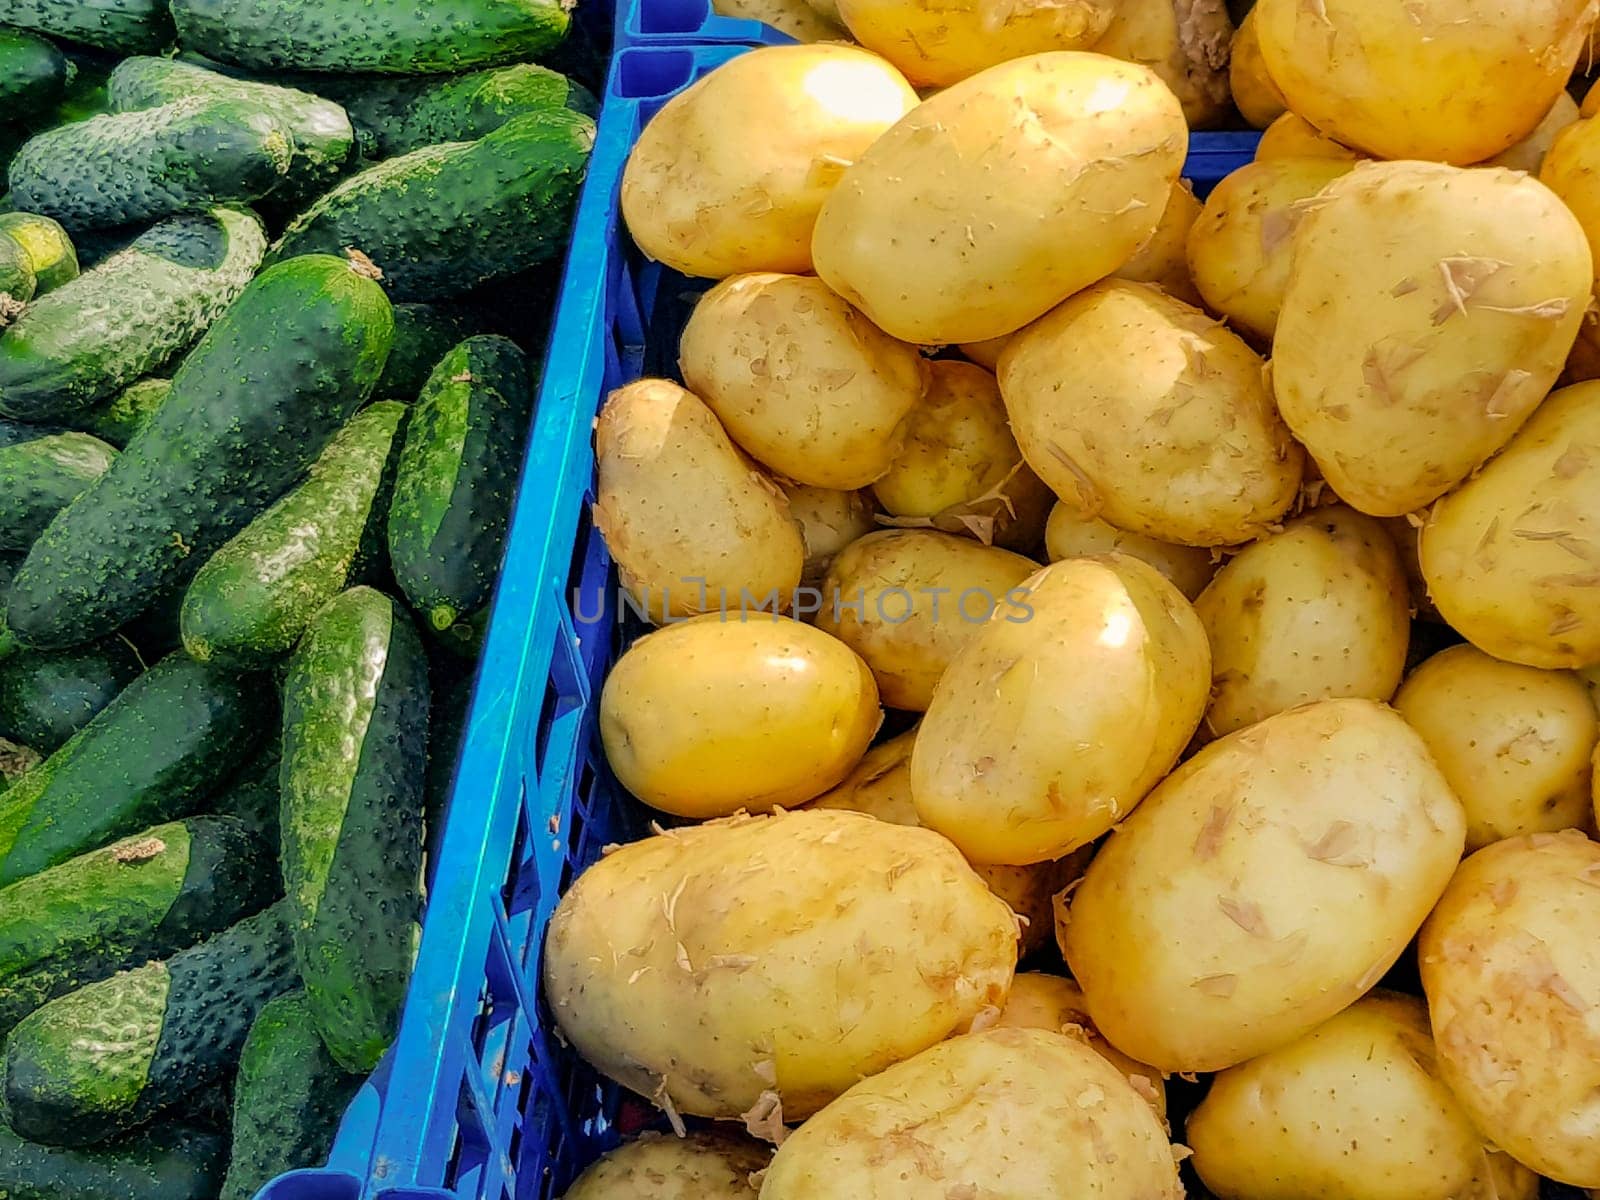 Sale of organic food products at the farmer's market. Fresh potatoes and cucumbers on the counter close-up.